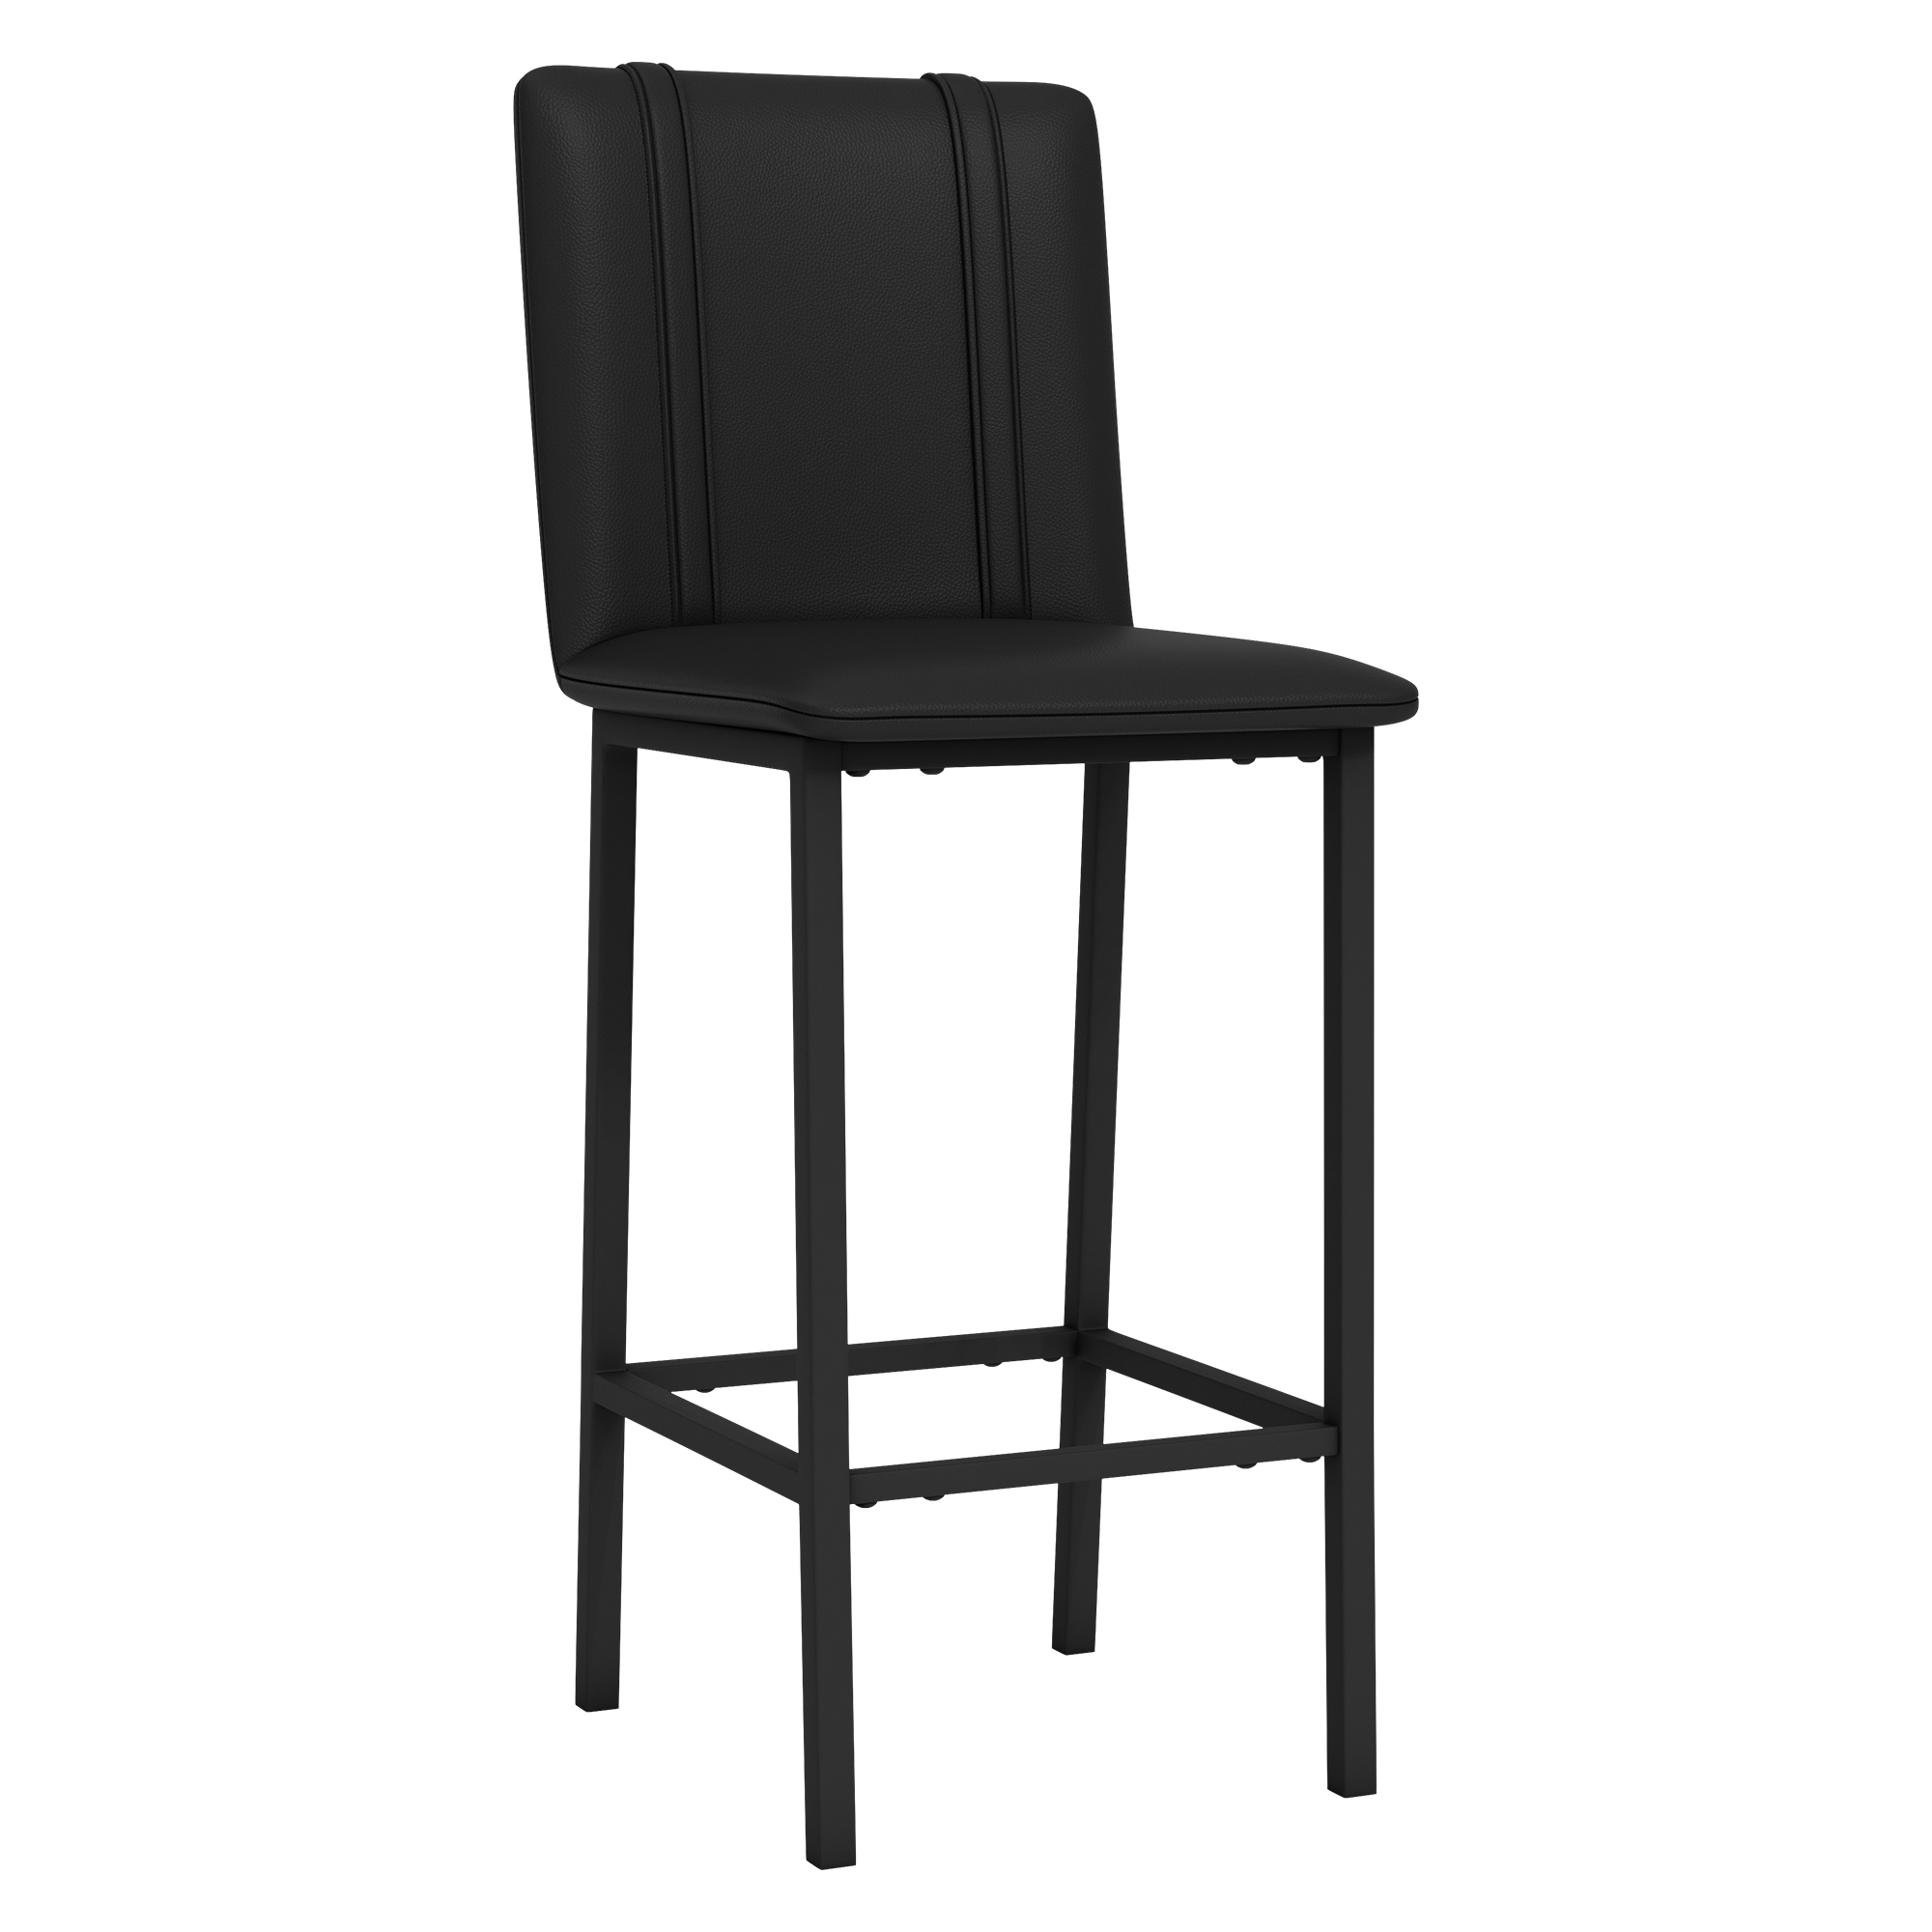 Bar Stool 500 with Texas Rangers Cooperstown Set of 2